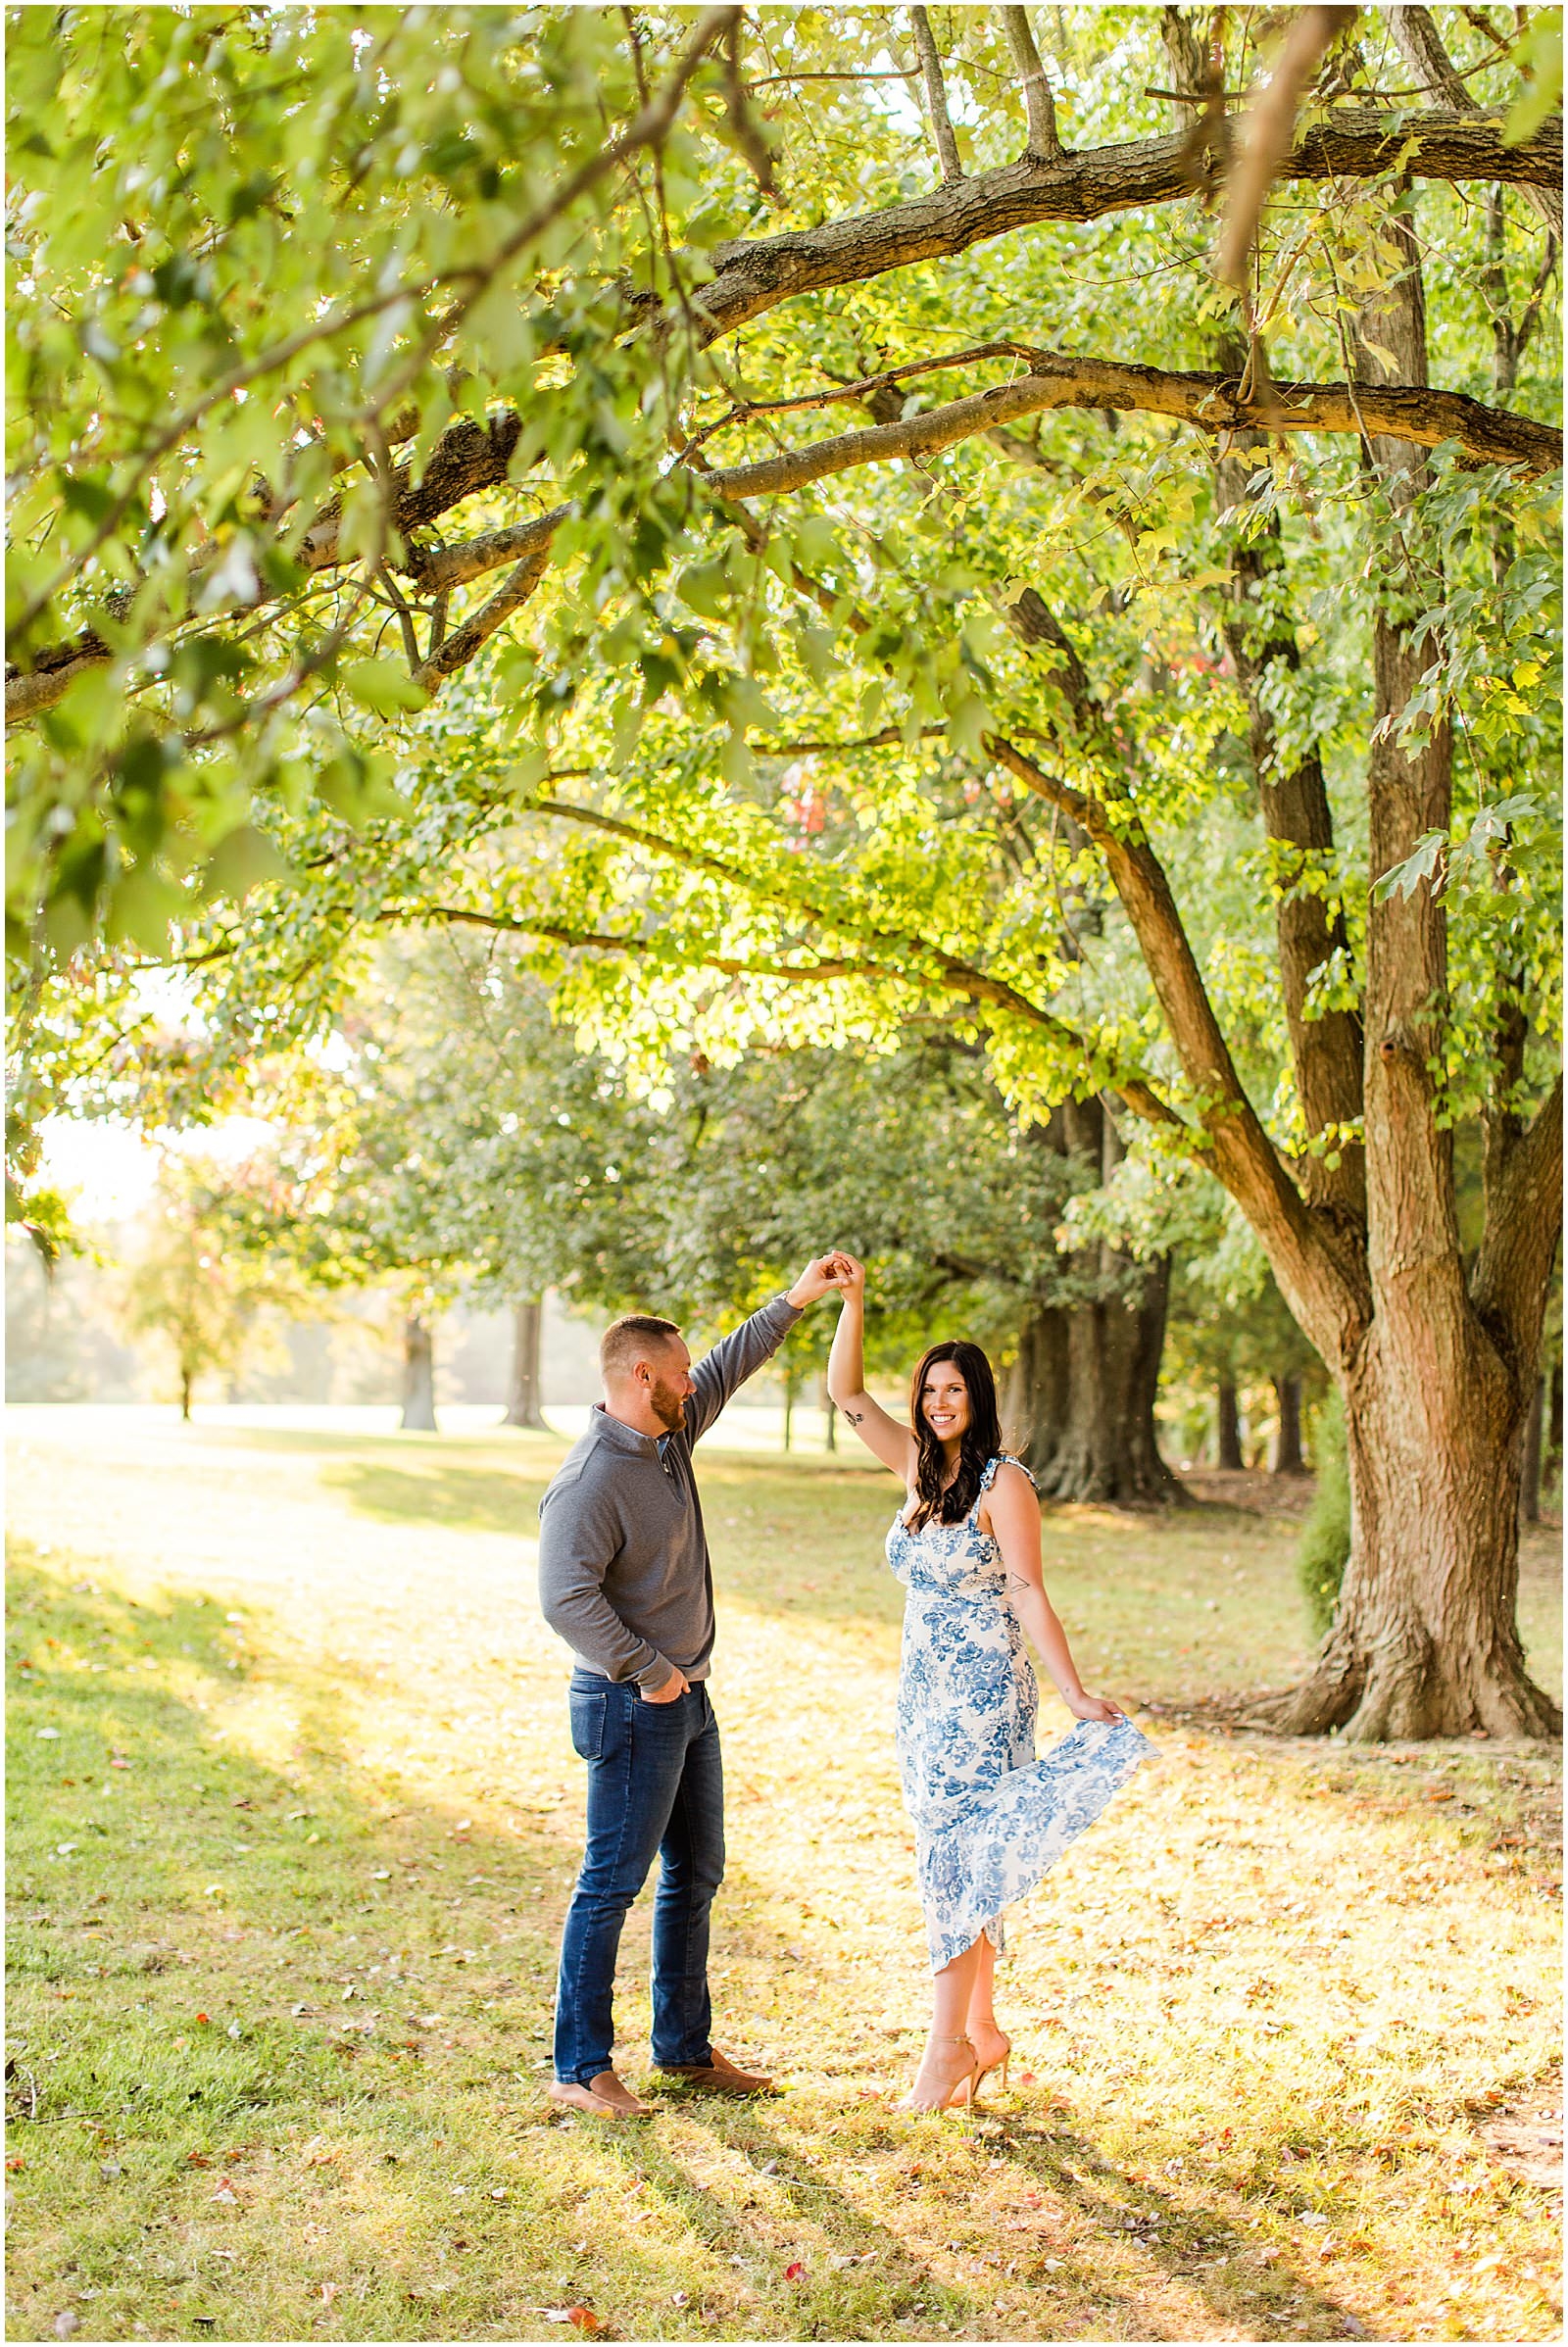 A Rolling Hills Country Club Engagement Session | Meagan and Kyle | Bret and Brandie Photography 0032.jpg